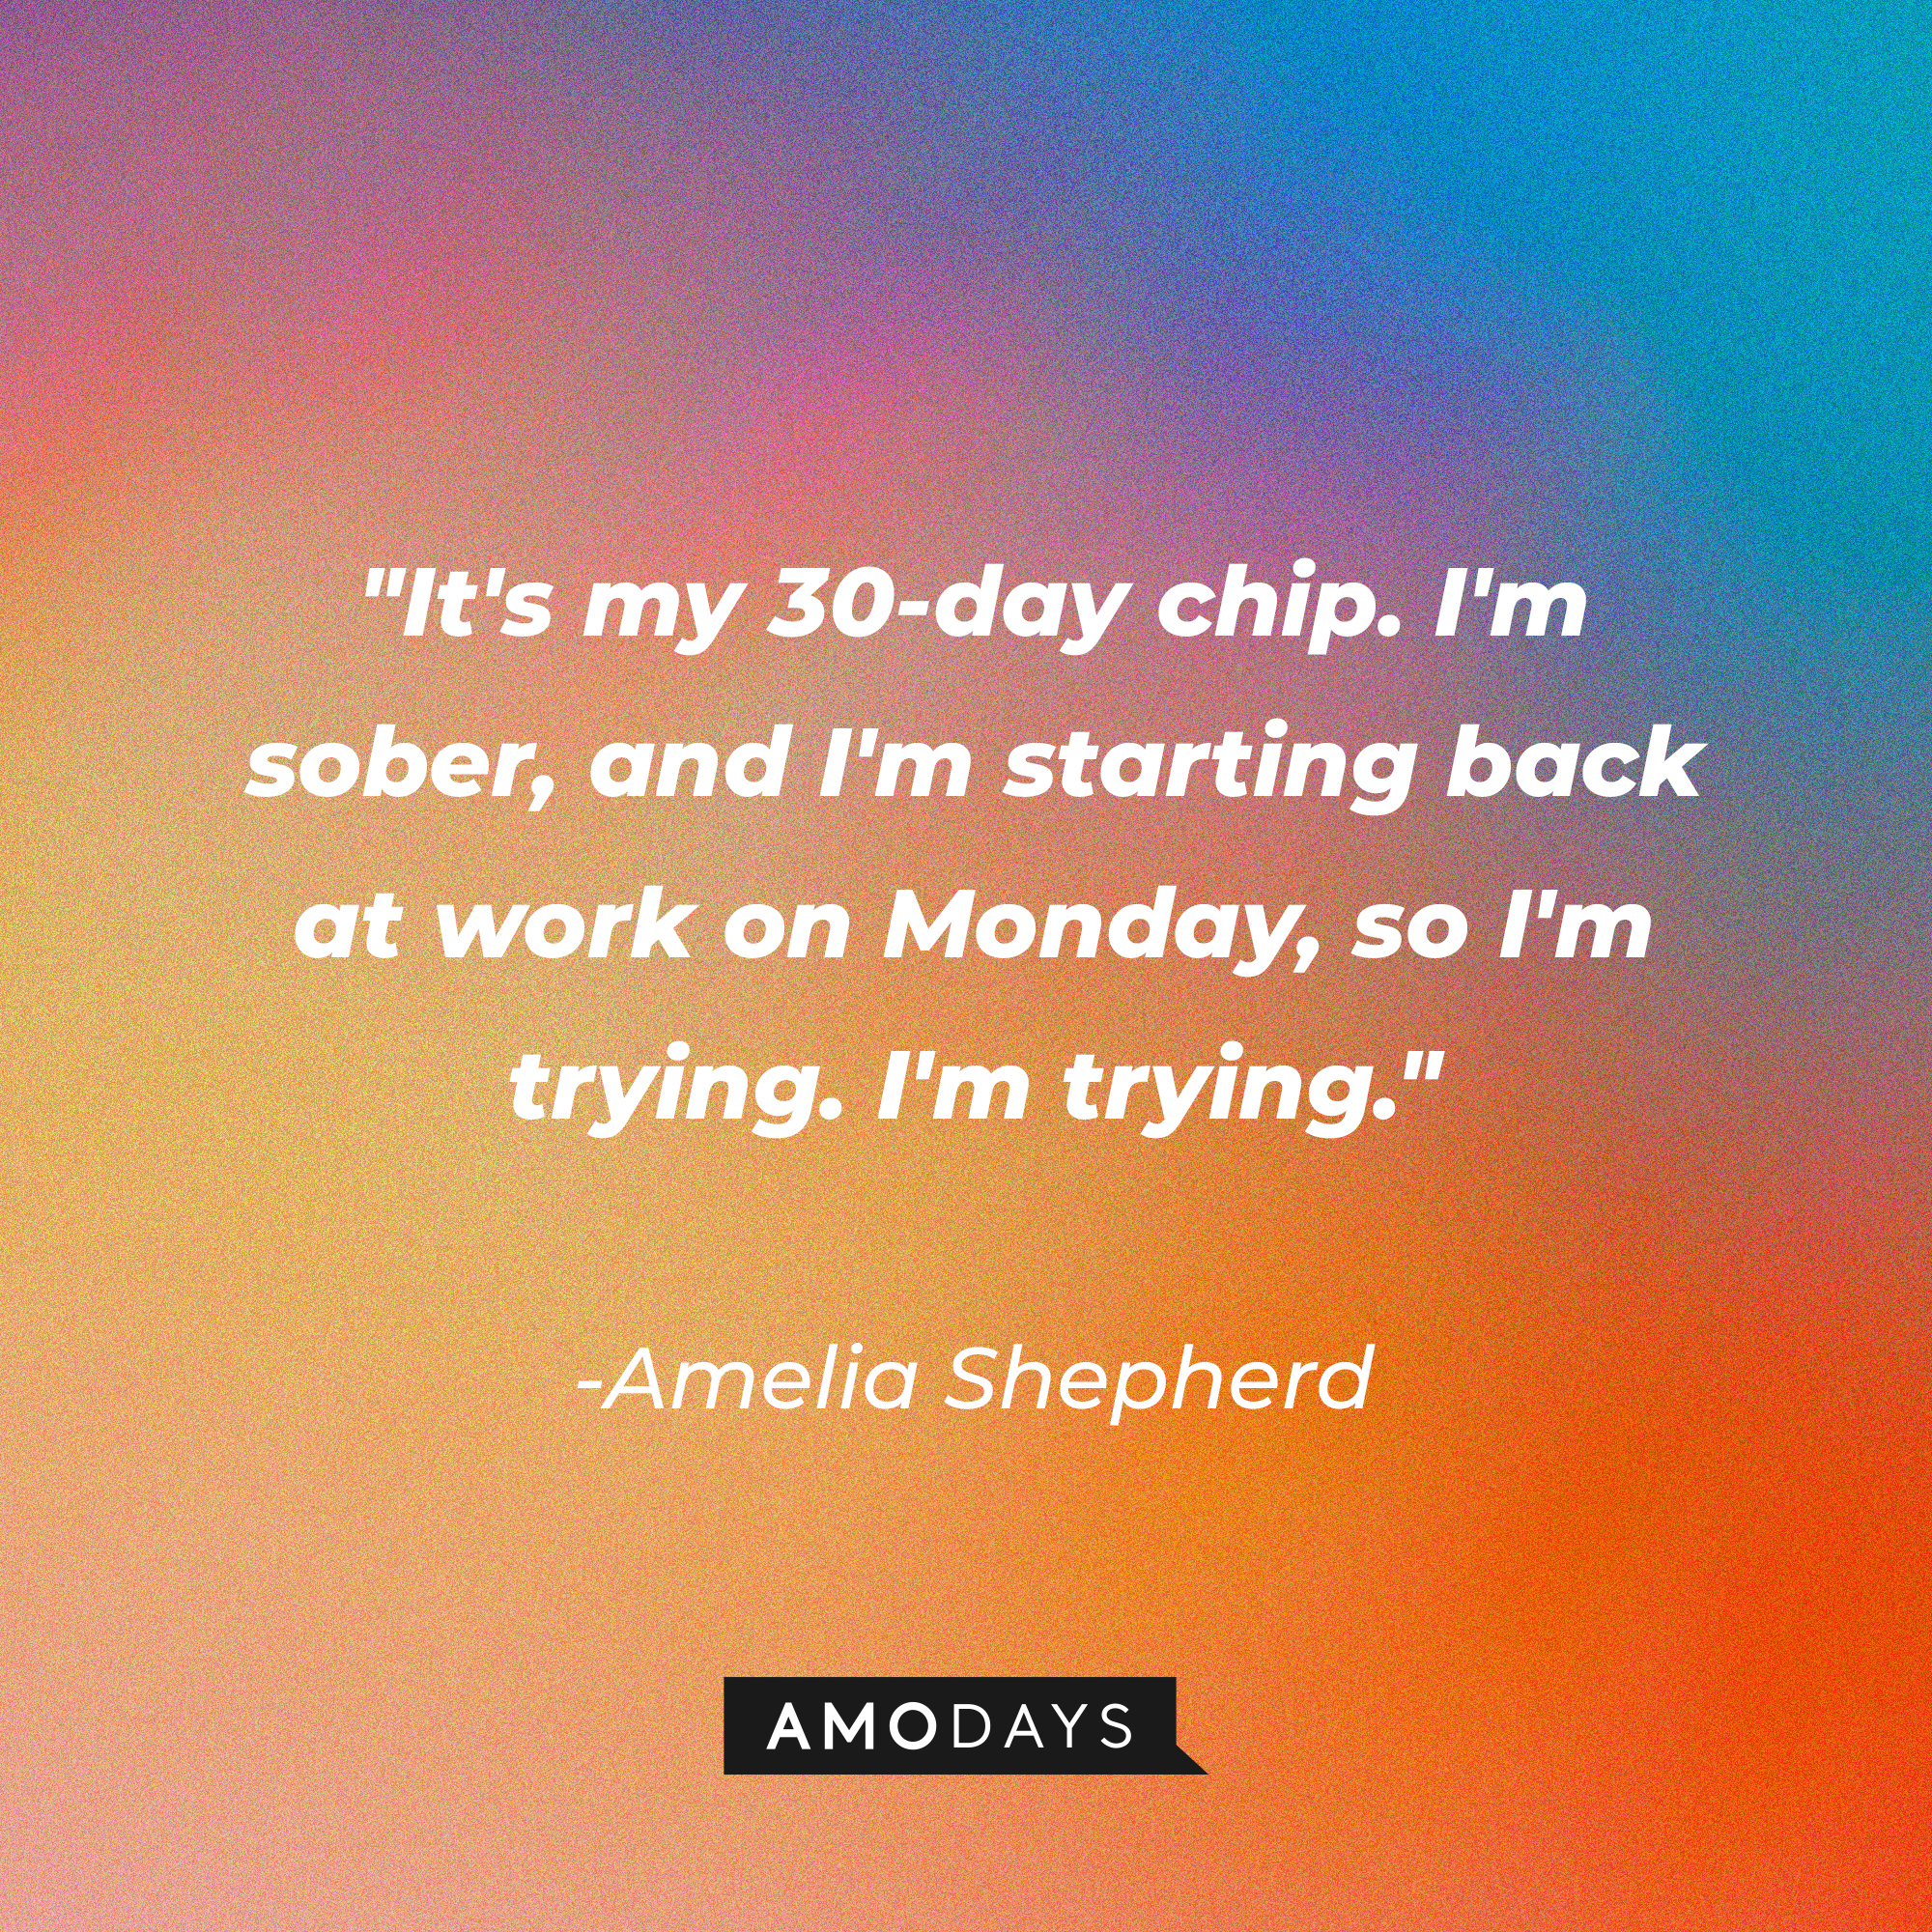 Amelia Shepherd's quote: "It's my 30-day chip. I'm sober, and I'm starting back at work on Monday, so I'm trying. I'm trying." | Source: AmoDays